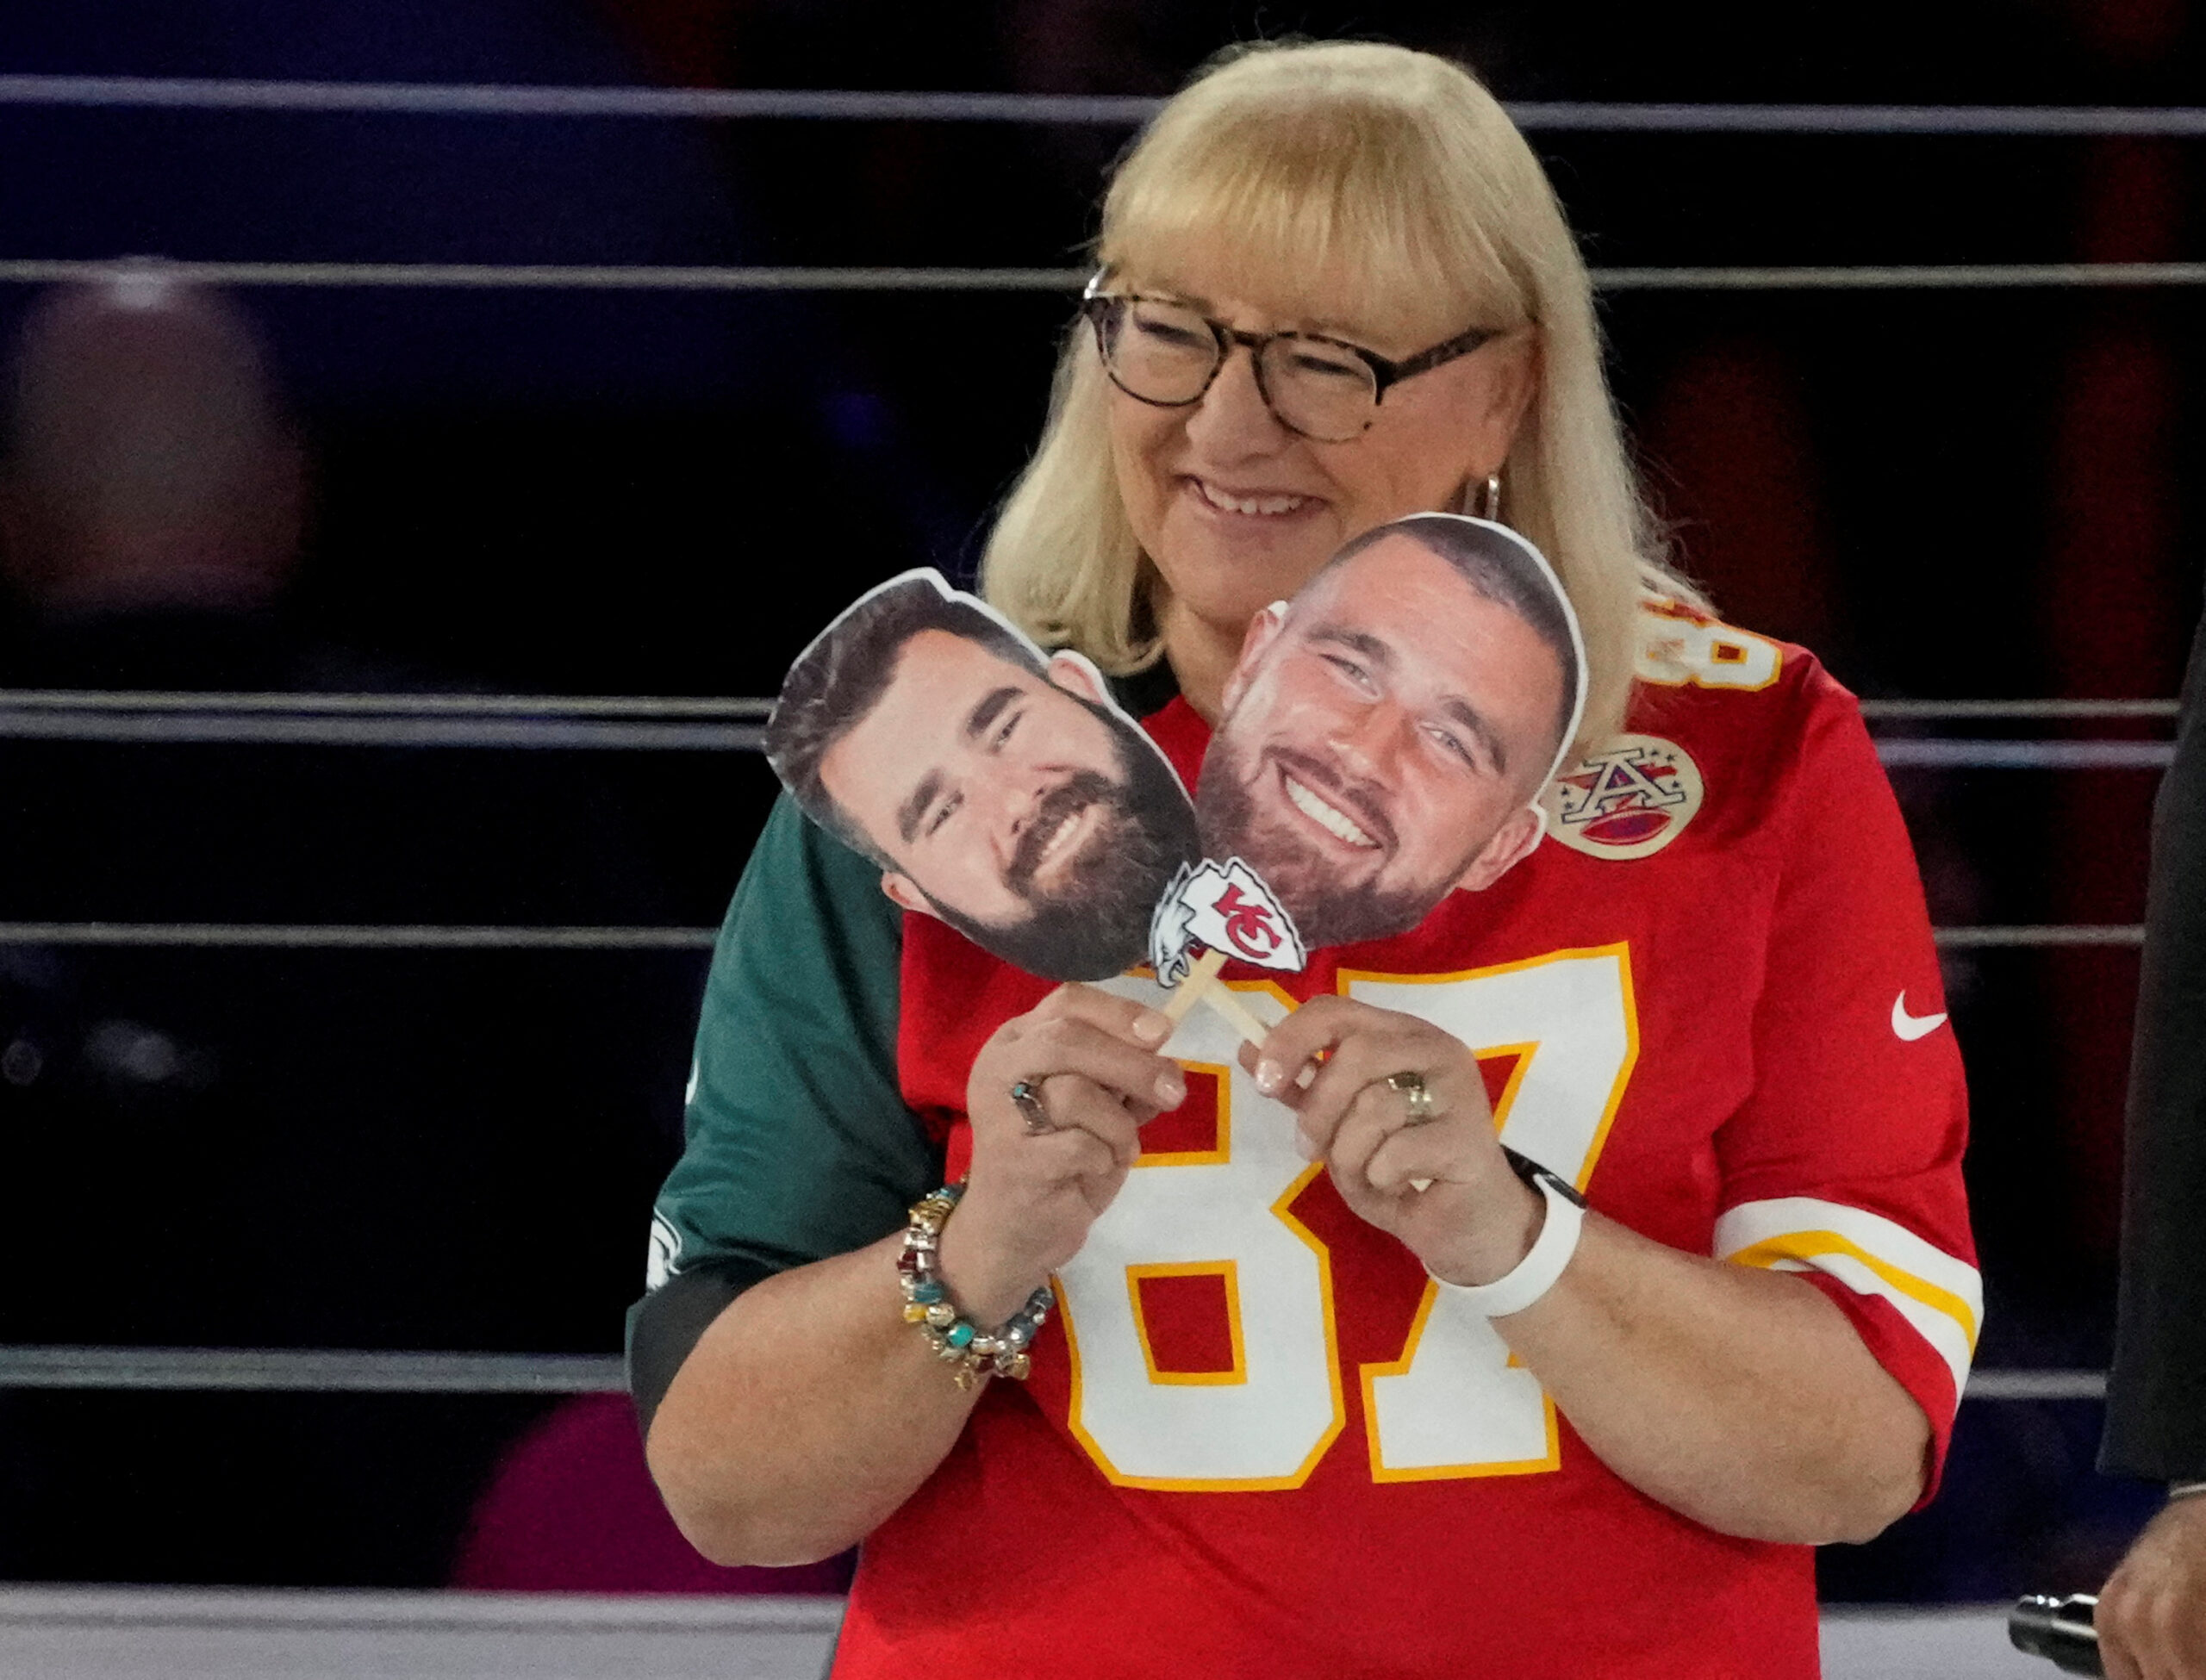 The Kelce's mum Donna was cheering them both on